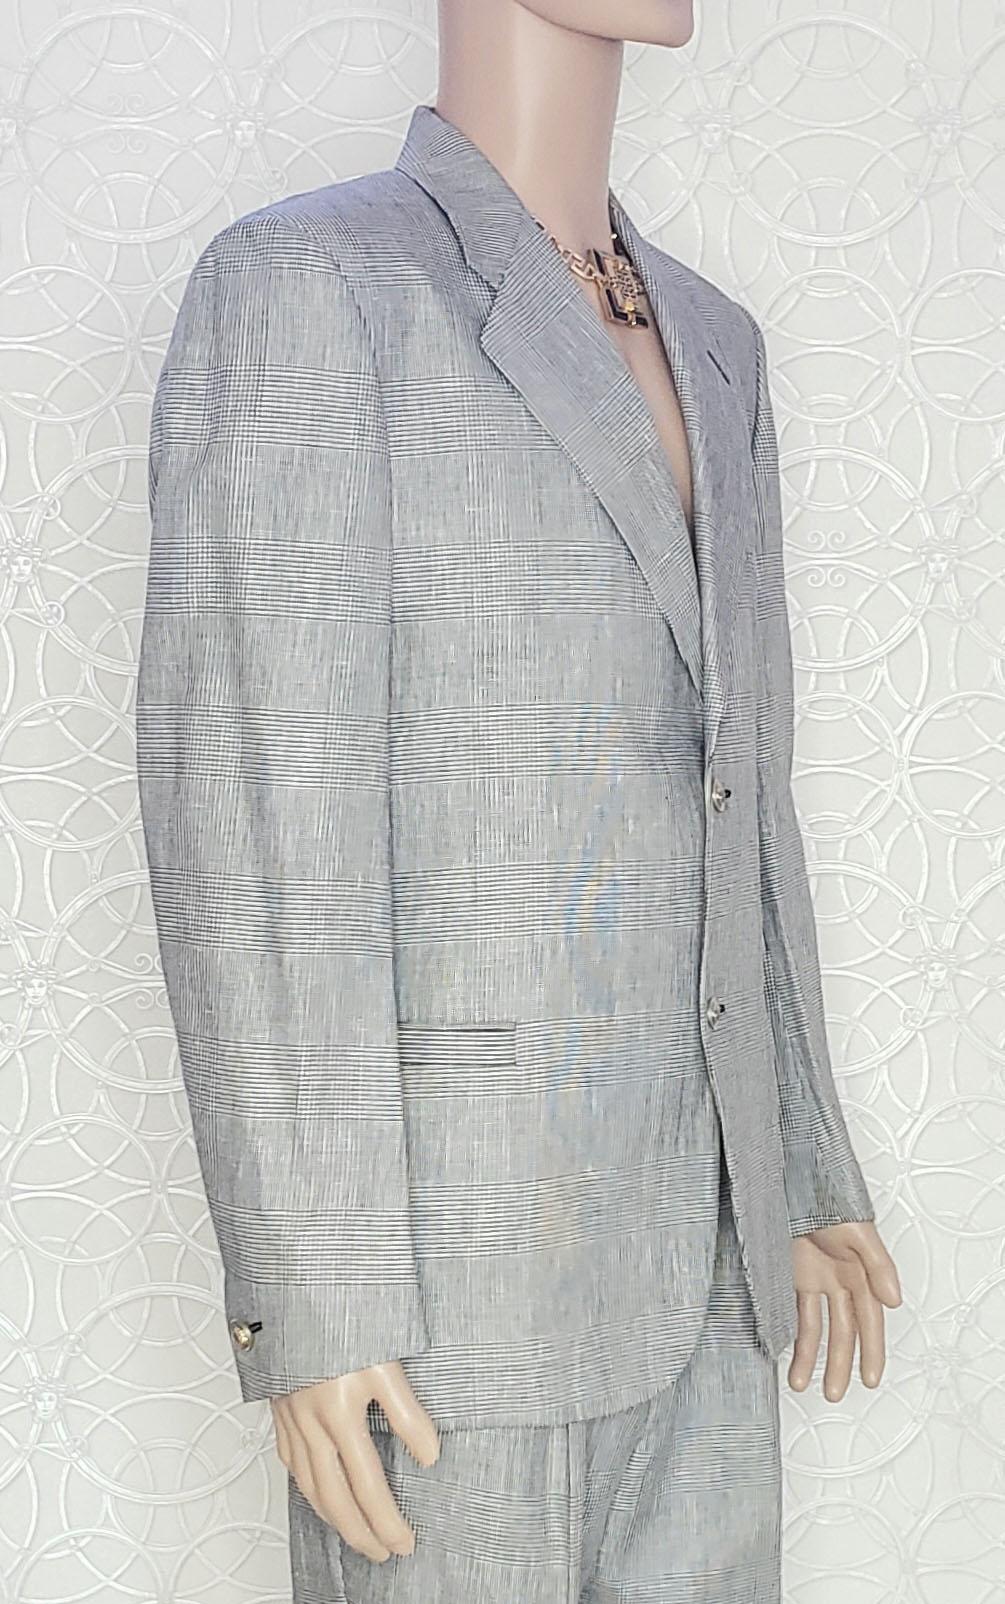 VERSACE S/S 2012 look # 2 BRAND NEW GRAY SUIT 48 - 38 (M) For Sale 4